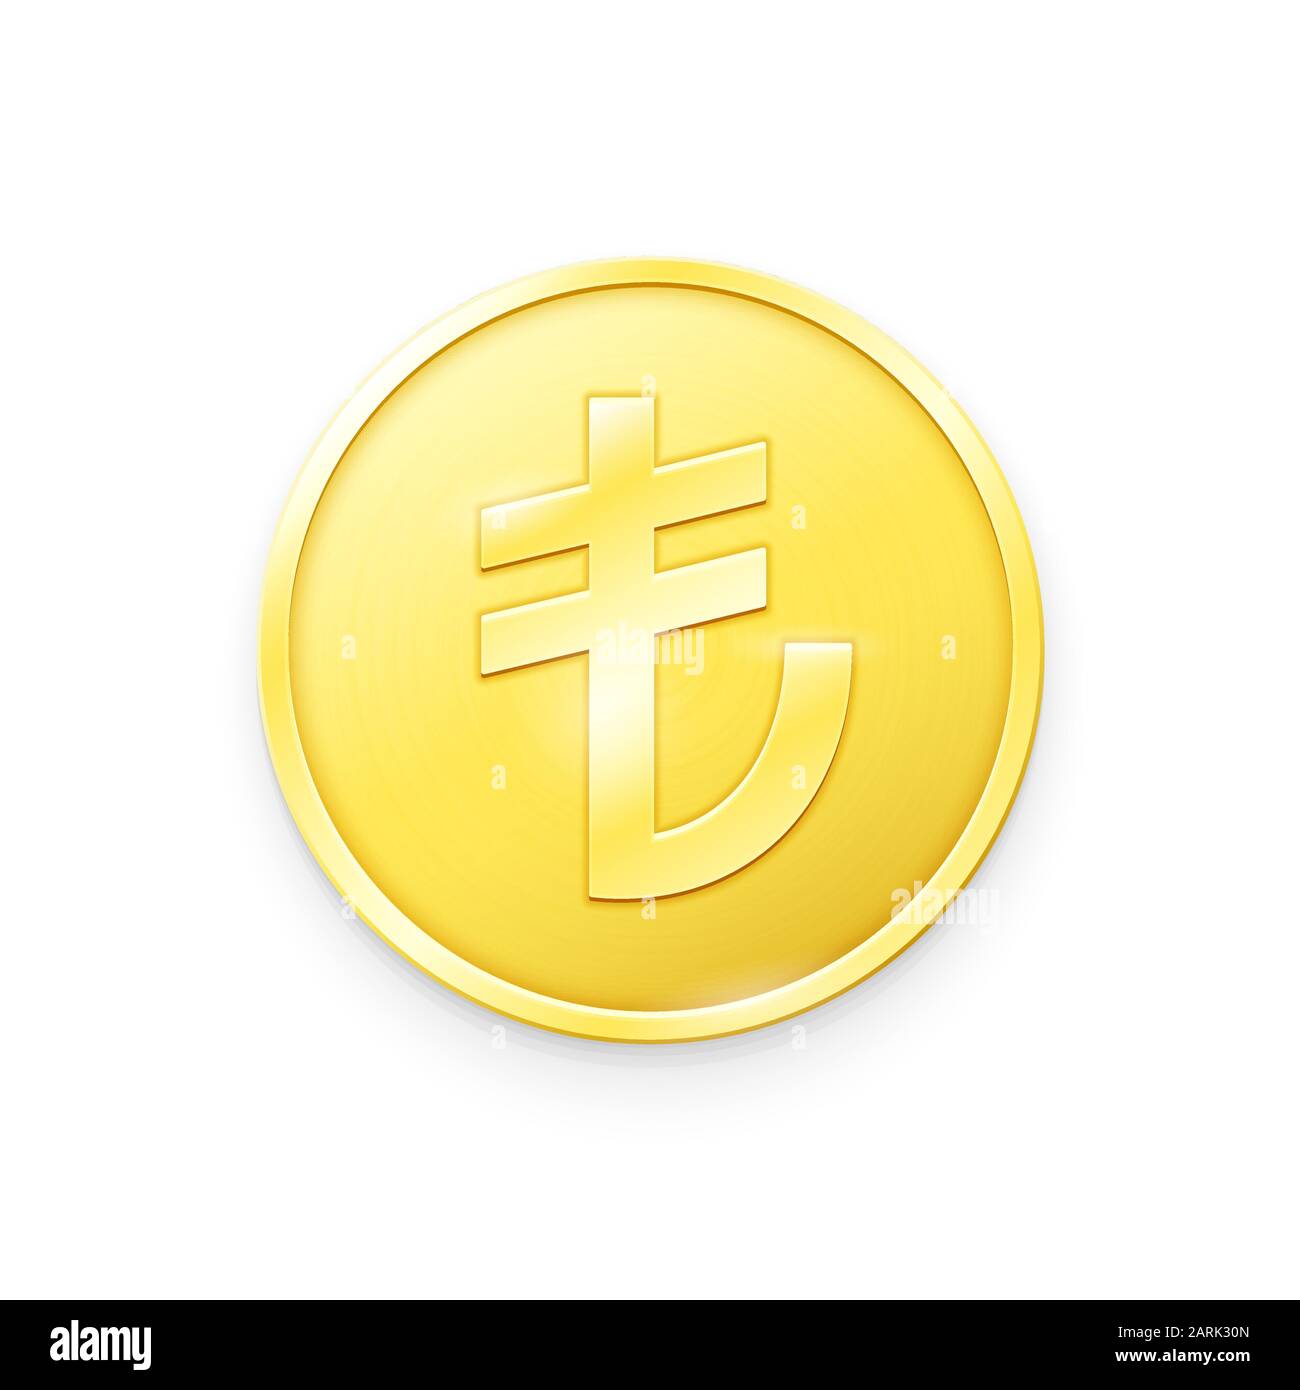 Gold coin with Turkish Lira sign. Vector illustration showing the symbol of the currency of Turkey in the form of a gold coin Stock Vector